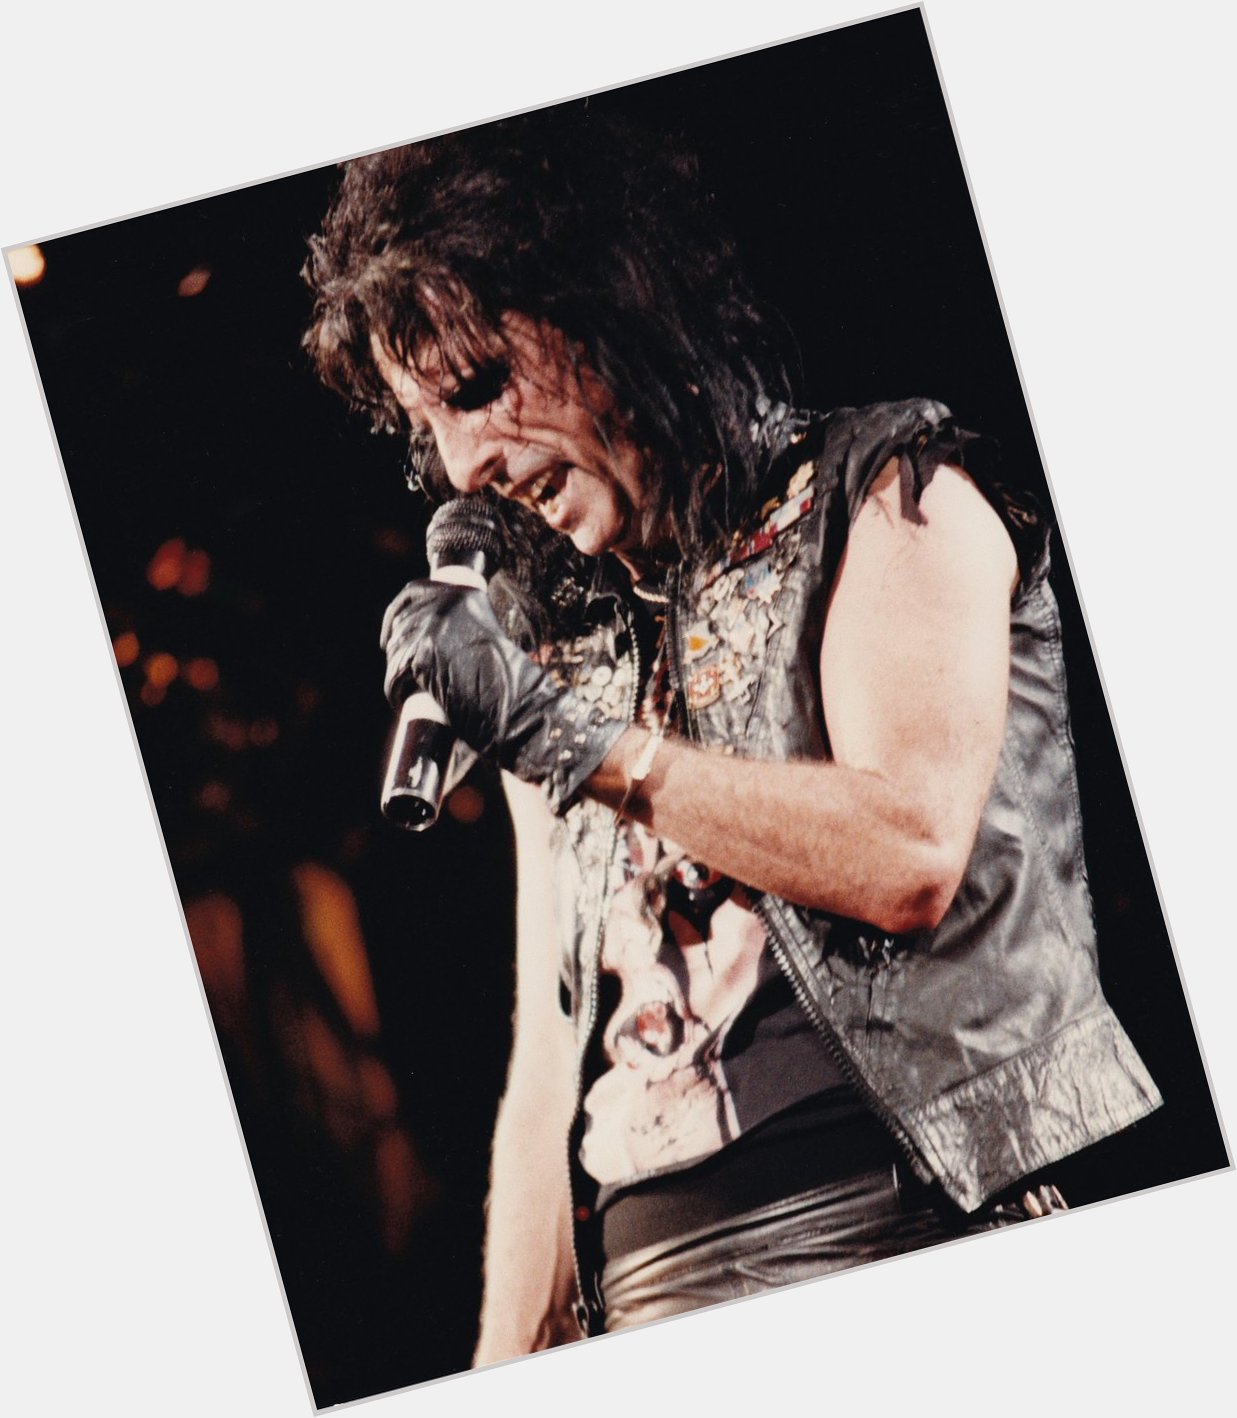 Happy Birthday to Alice Cooper! : Ed Spinelli 
FB: Ed Spinelli Photography
IG: 